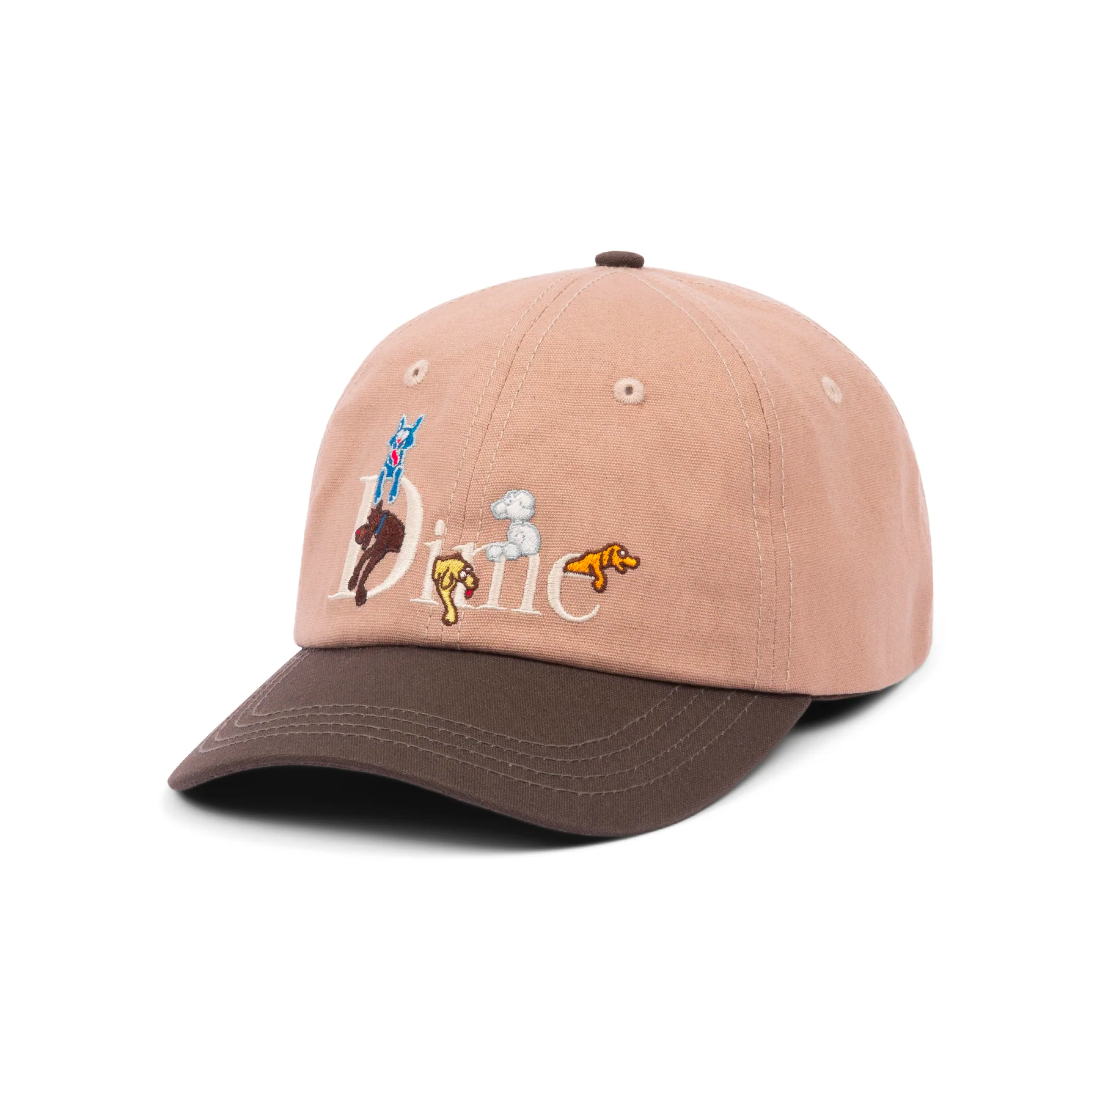 【Dime】Classic Dogs Low Pro Cap - Taupe